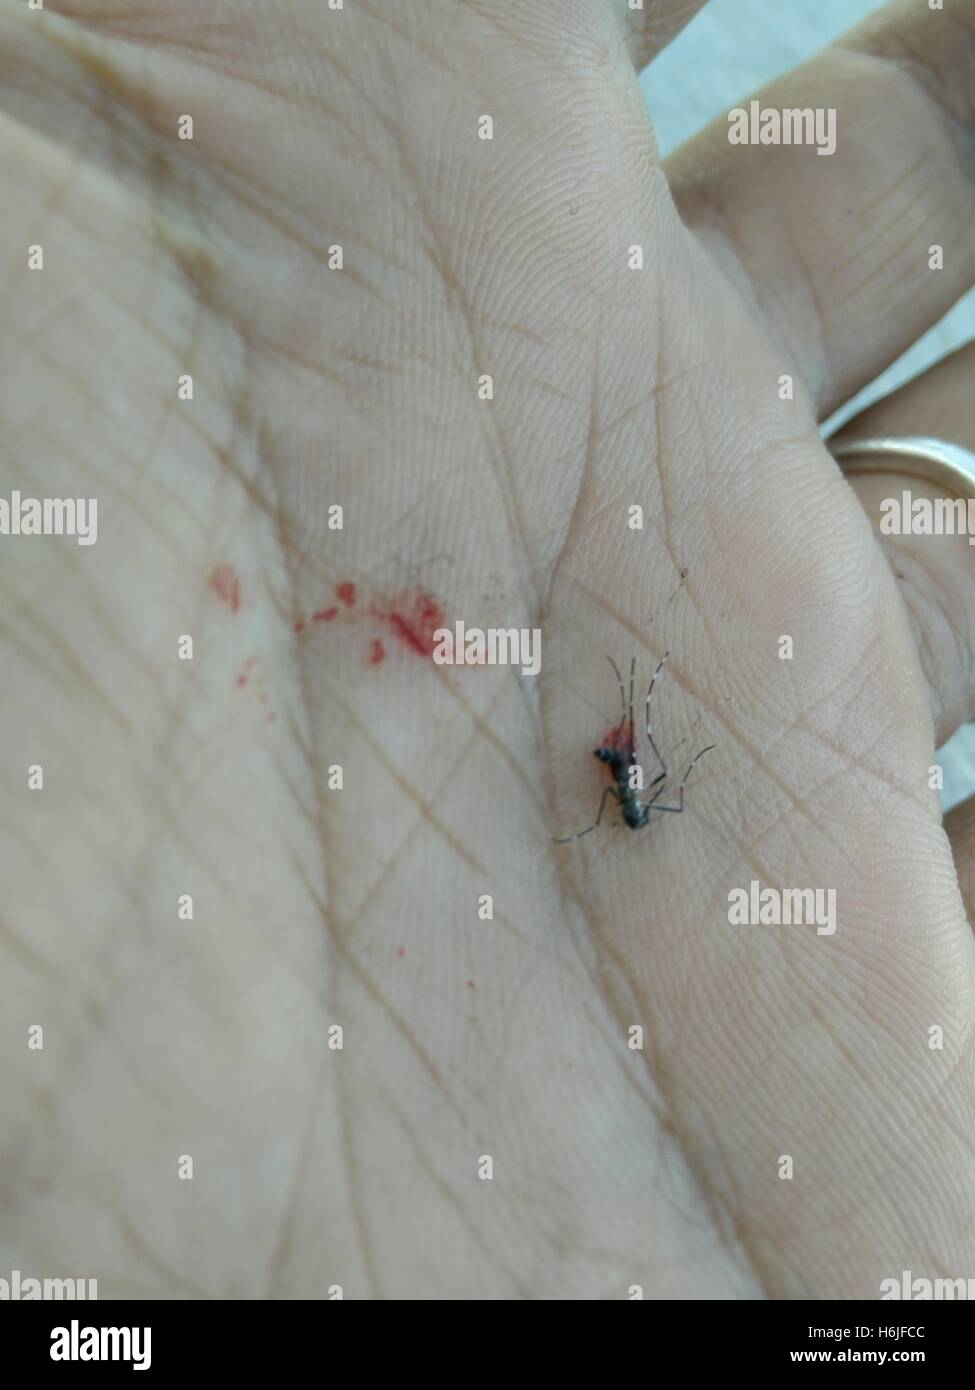 A dead Asian tiger mosquito (Aedes albopictus) in a man's hand. Photographed in Israel Stock Photo